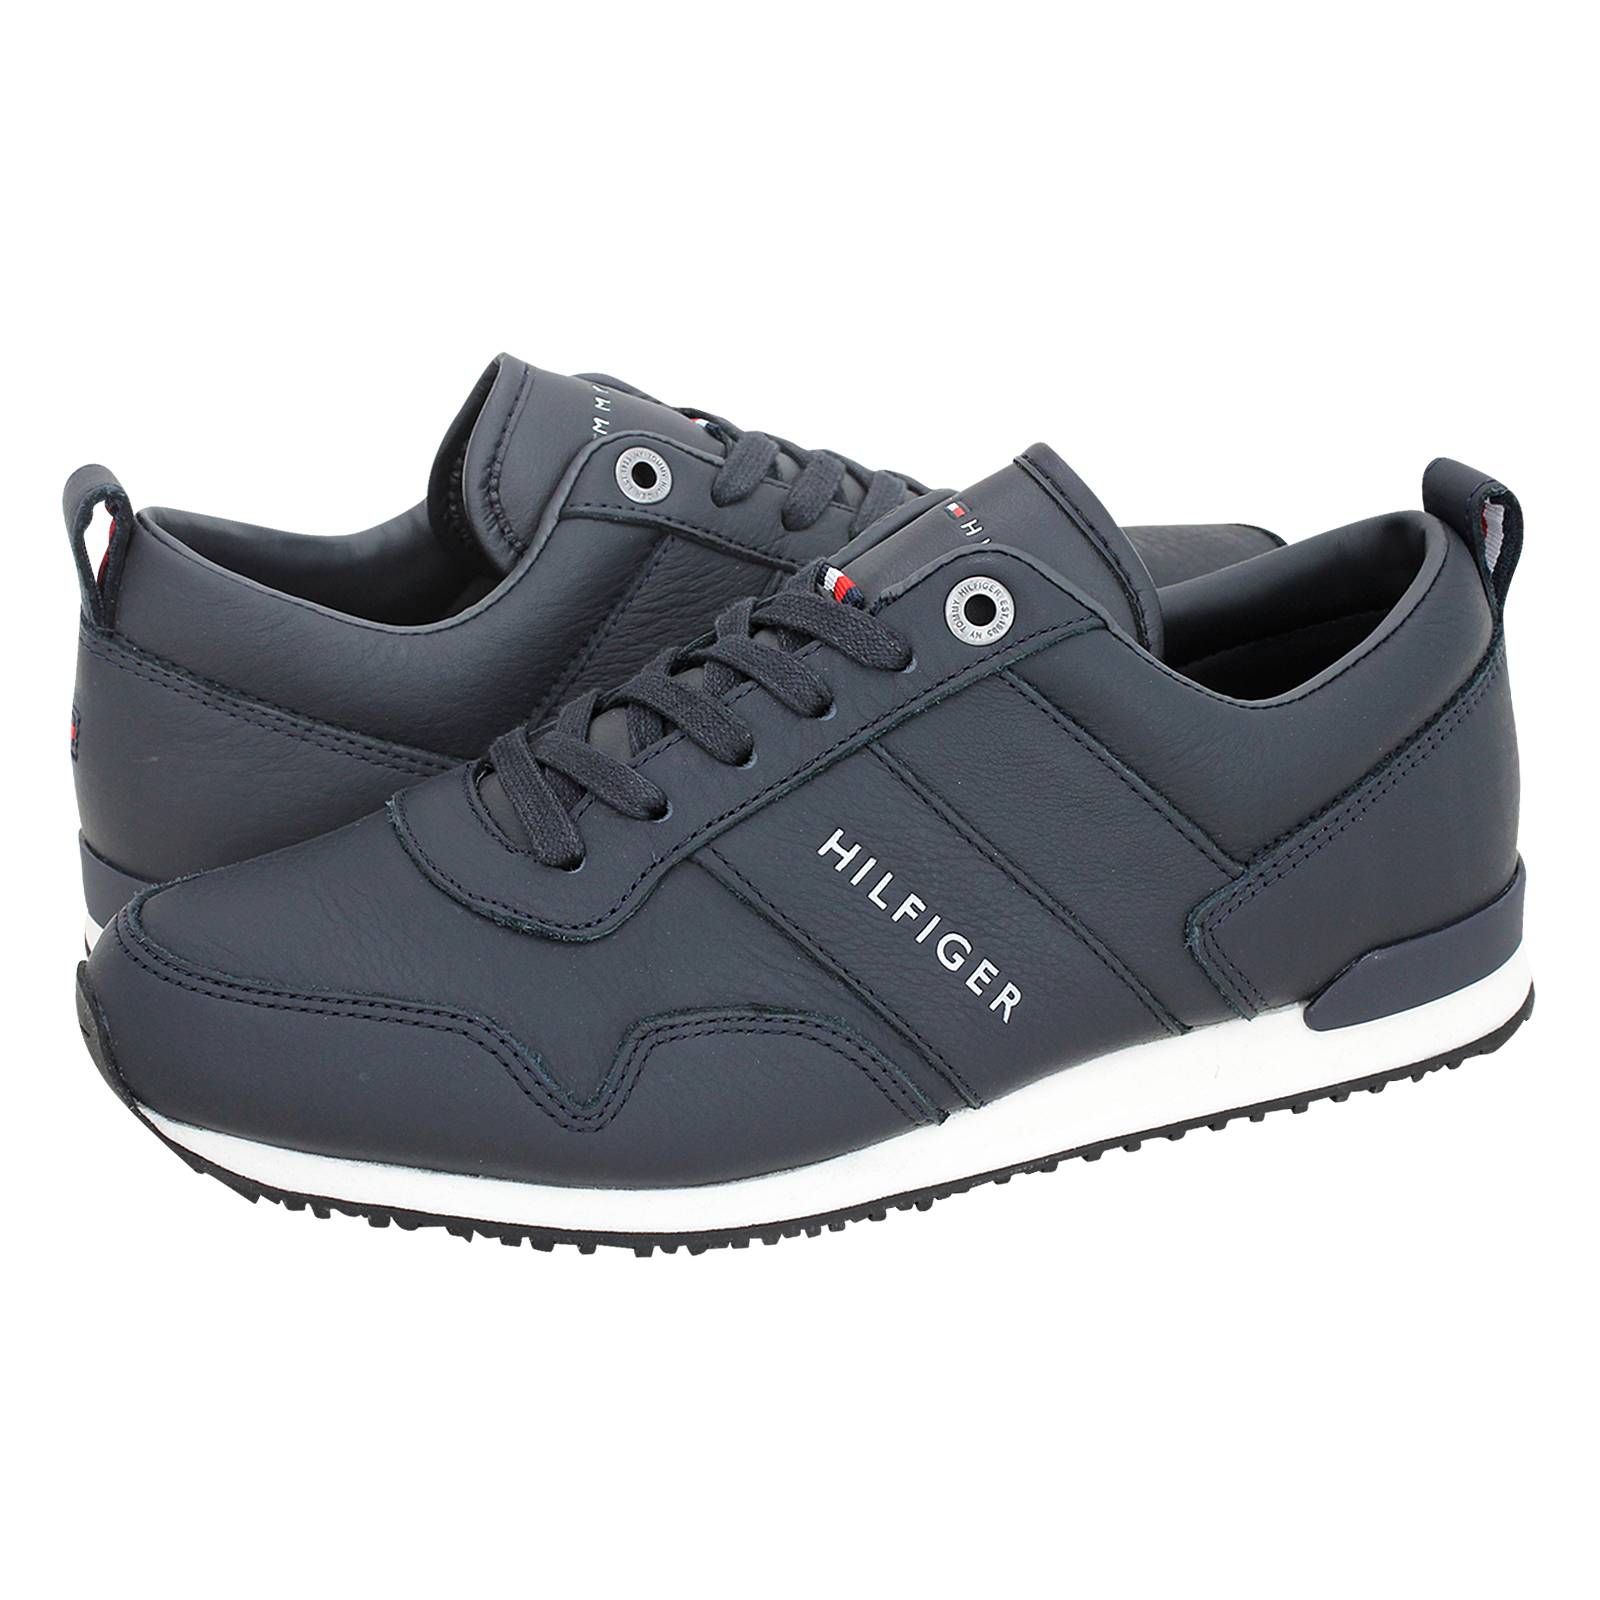 Tommy Hilfiger Men's casual shoes made 